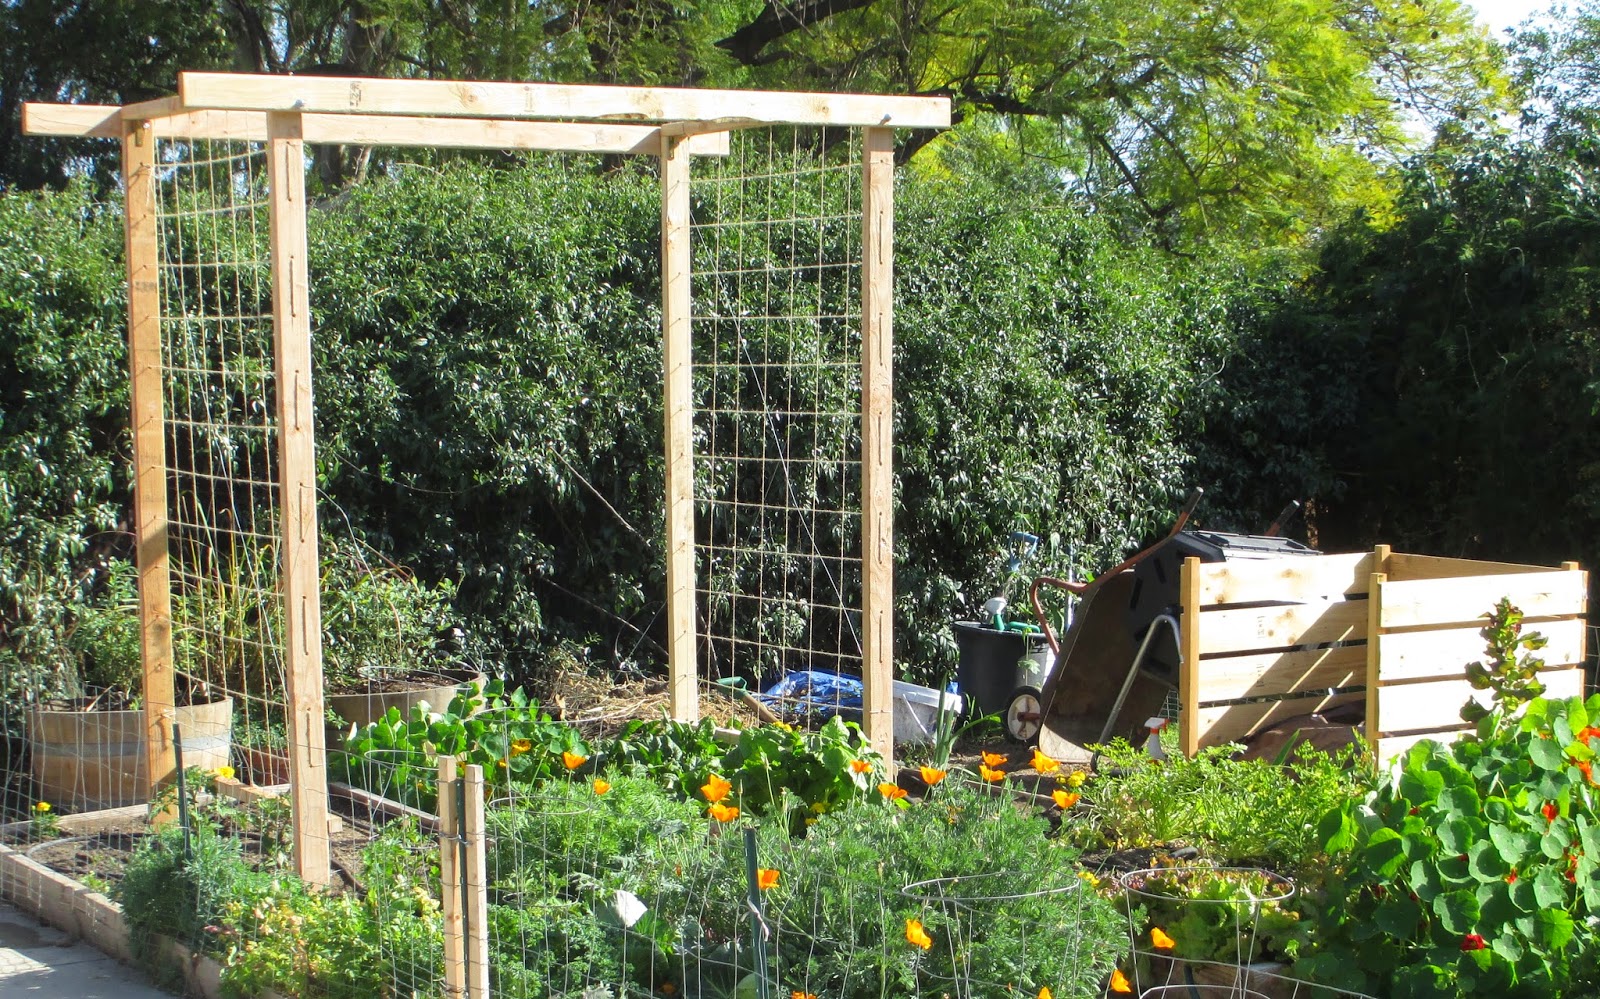 Andie's Way: Trellis Ideas for Tomatoes, Cucumbers, Beans, Peas, Melons